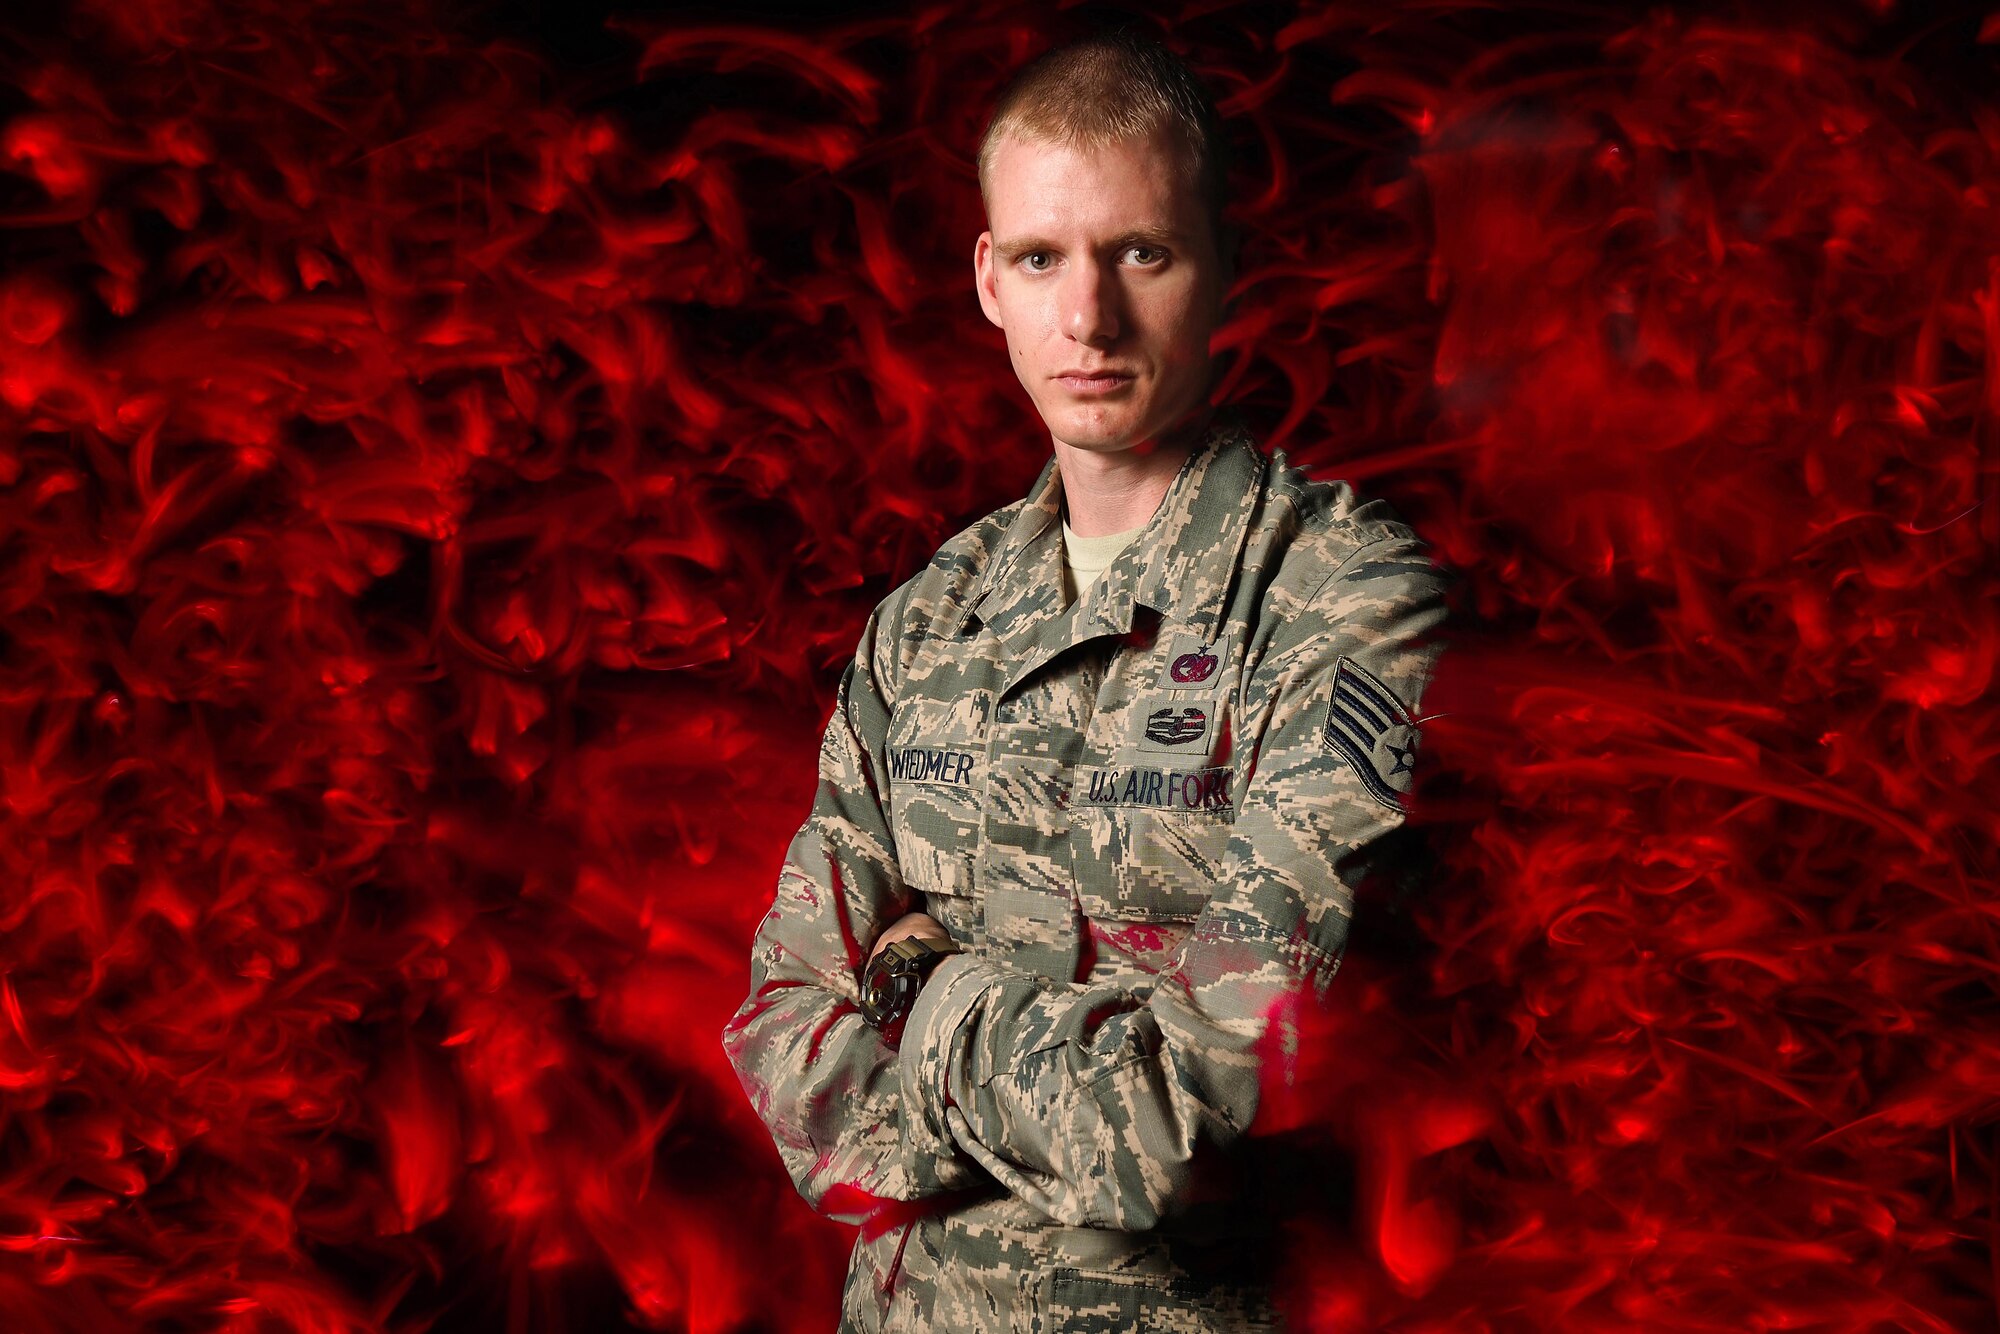 Air Force Staff Sgt. Christopher Wiedmer, a vehicle operator assigned to the 773d Logistics Readiness Squadron at Joint Base Elmendorf-Richardson, Alaska, poses for a portrait, Wednesday, Oct. 5, 2016.  Wiedmer received the Purple Heart after he was wounded by an improvised explosive device, and suffered a traumatic brain injury and severe burns, in Iraq during his 2011 deployment in support of Operation New Dawn while serving as a lead vehicle commander with the 424th Medium Truck Detachment. Wiedmer stresses how important resiliency was to his recovery, and finds fulfillment in mentoring young Airmen saying he strives to live up to the noncommissioned officer standards he was shown as a junior Airman.